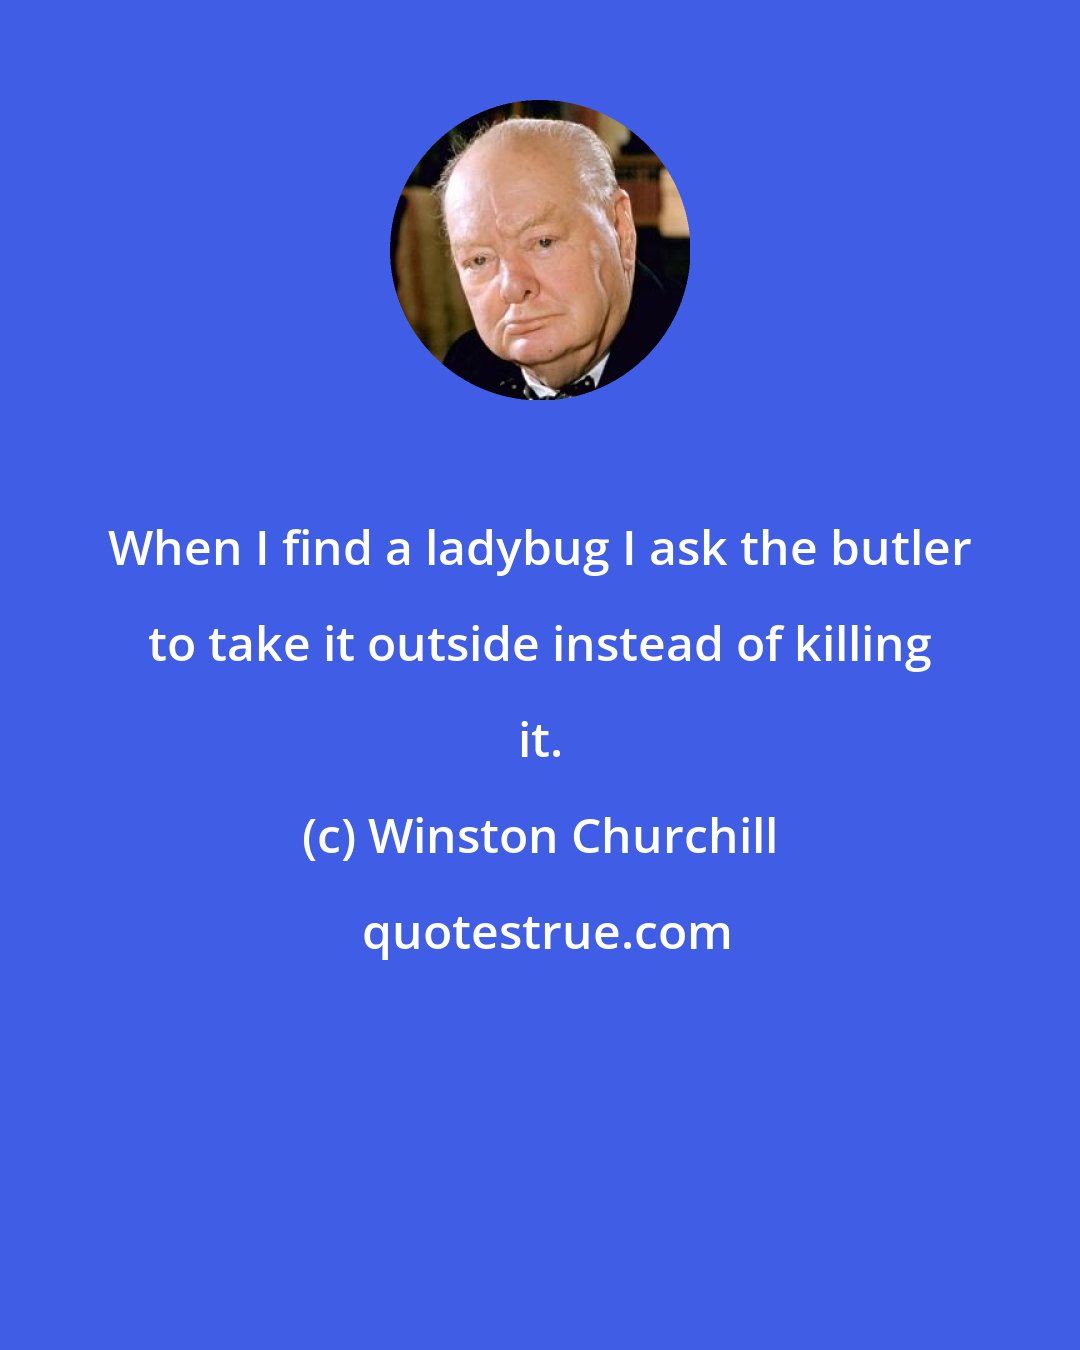 Winston Churchill: When I find a ladybug I ask the butler to take it outside instead of killing it.